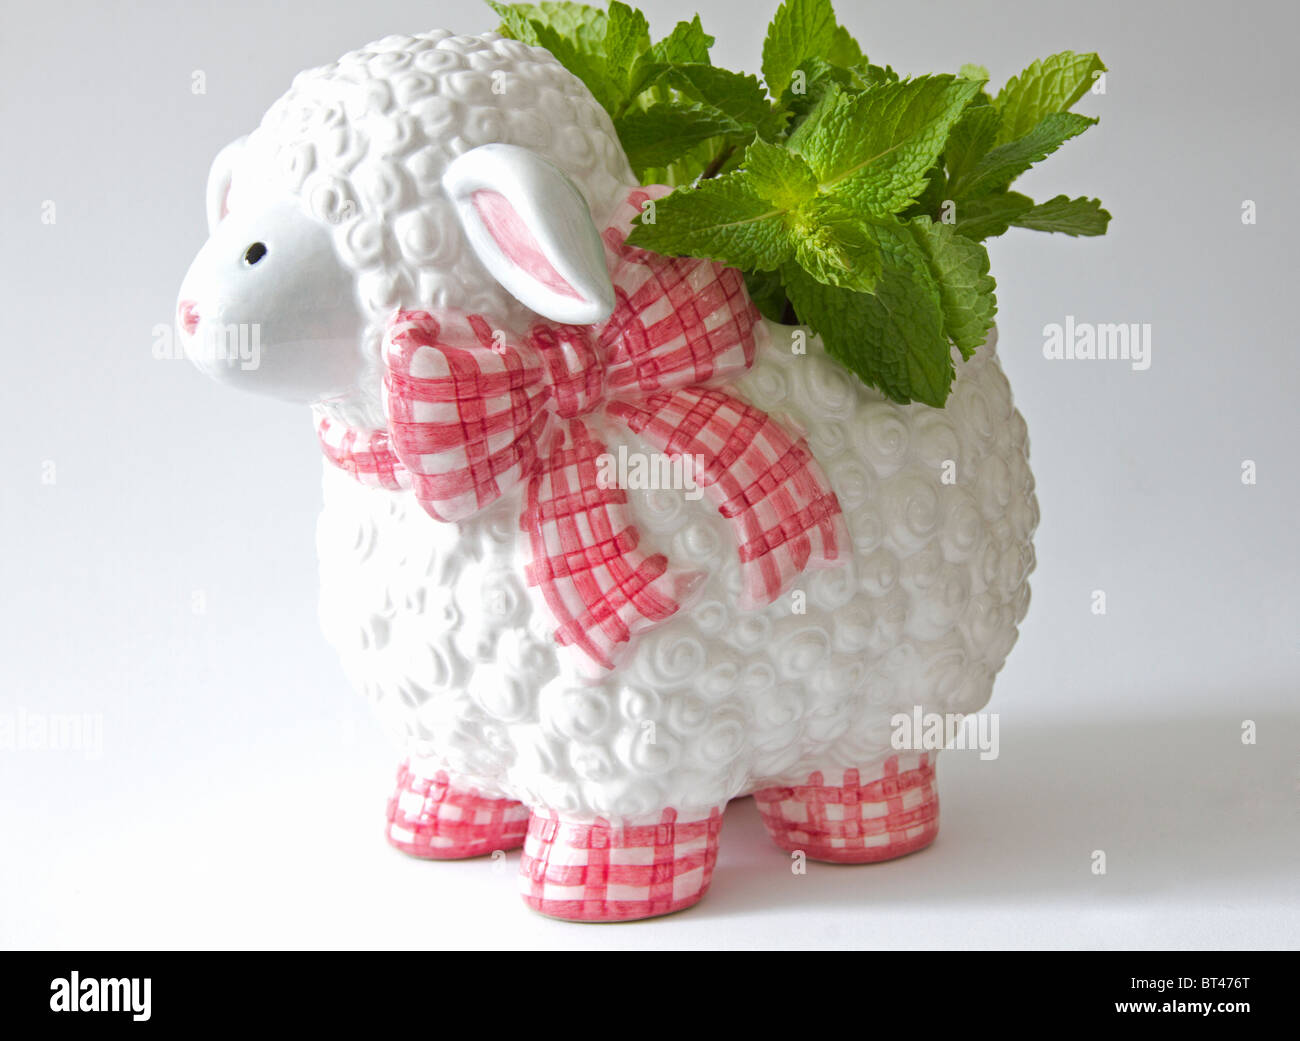 Plant pot in the shape of a lamb with sprigs of mint growing in it Stock Photo